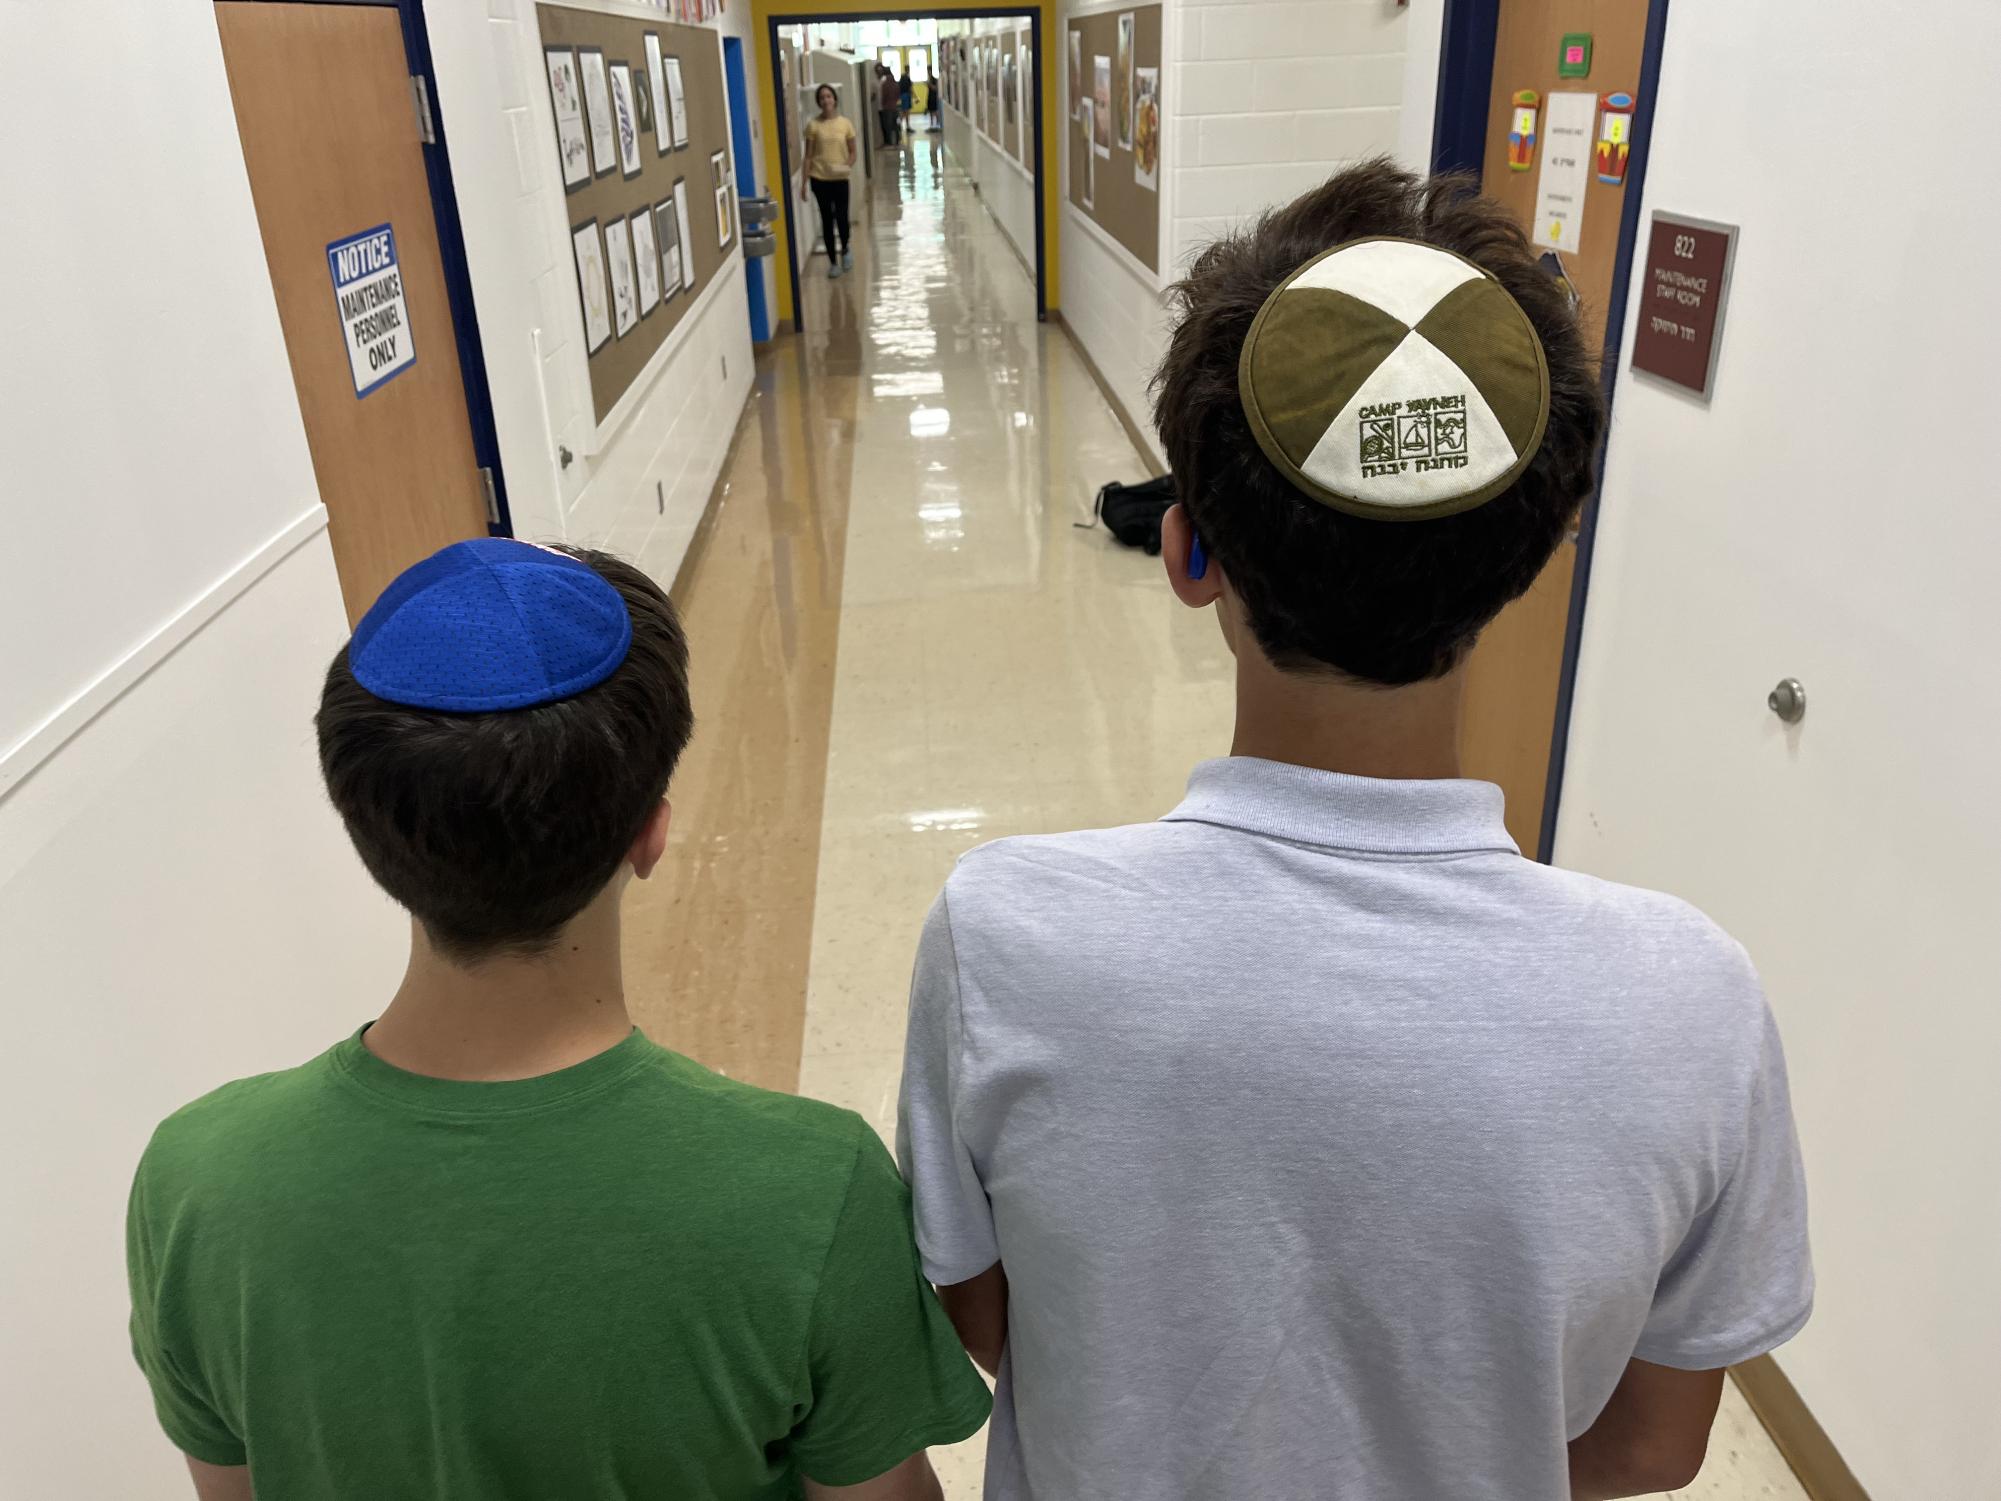 The school is enforcing the kippot policy for male-identifying students. 